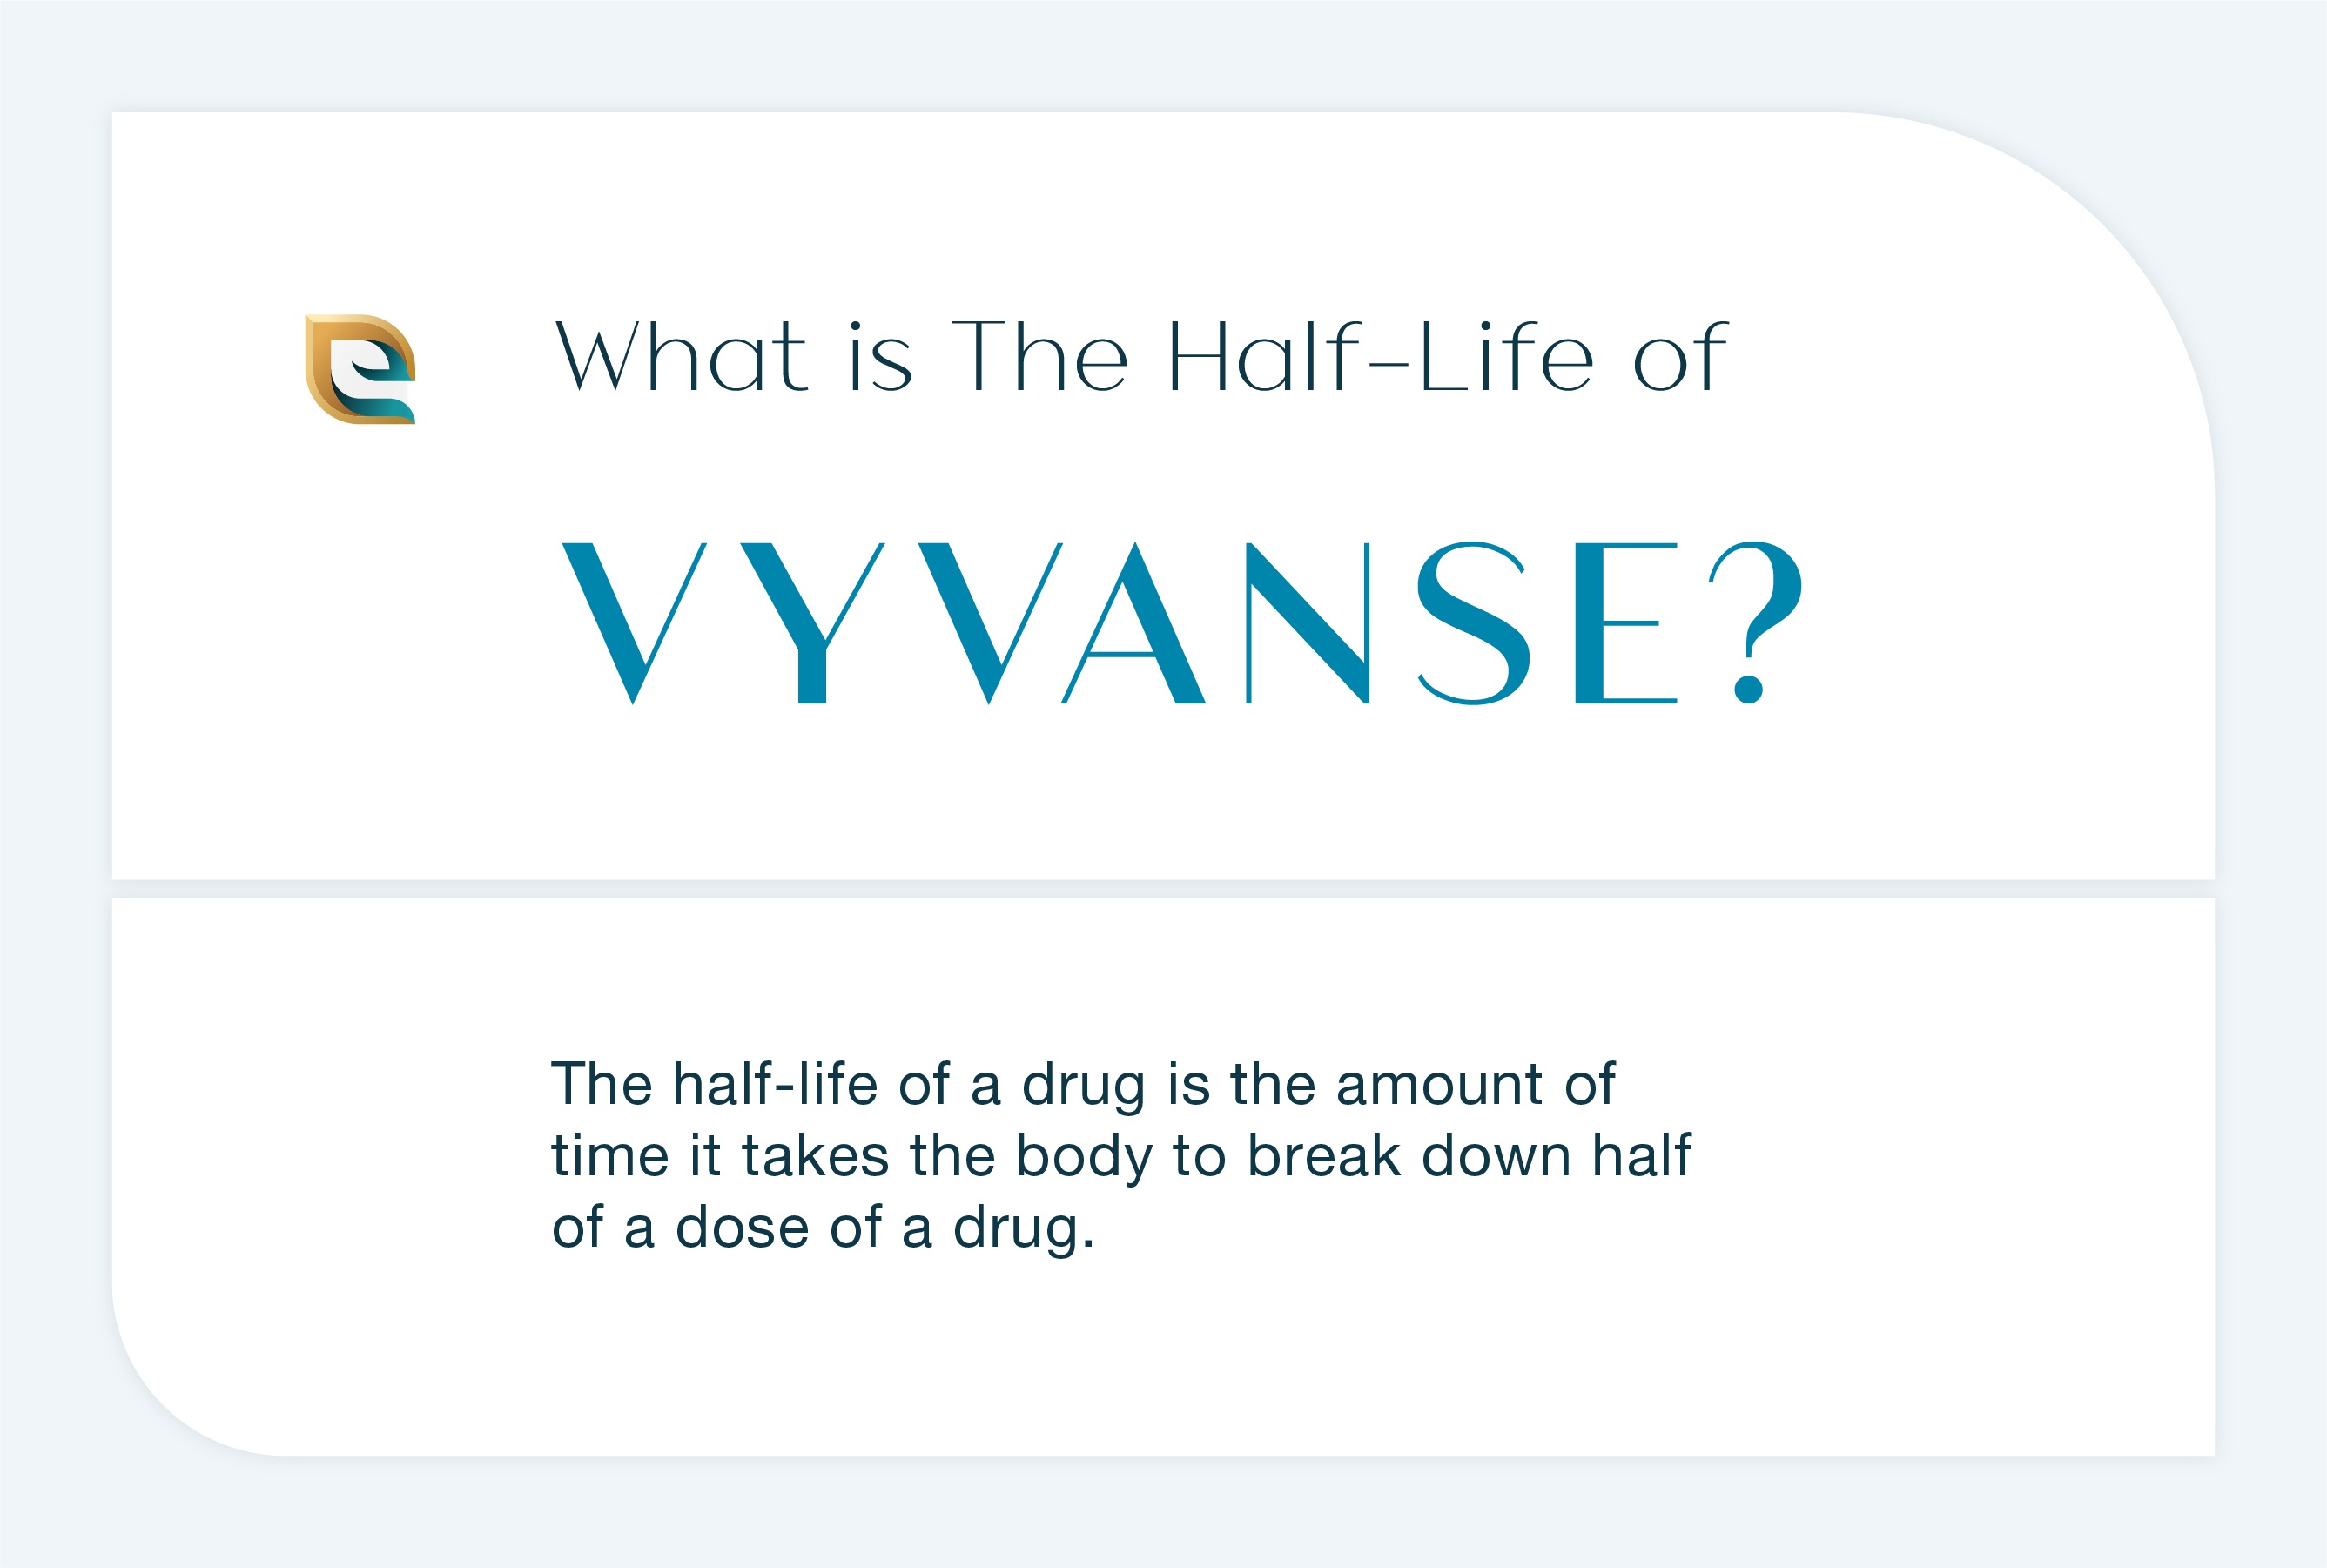 What Is The Half Life Of Vyvanse? This image describes the half life of Vyvanse